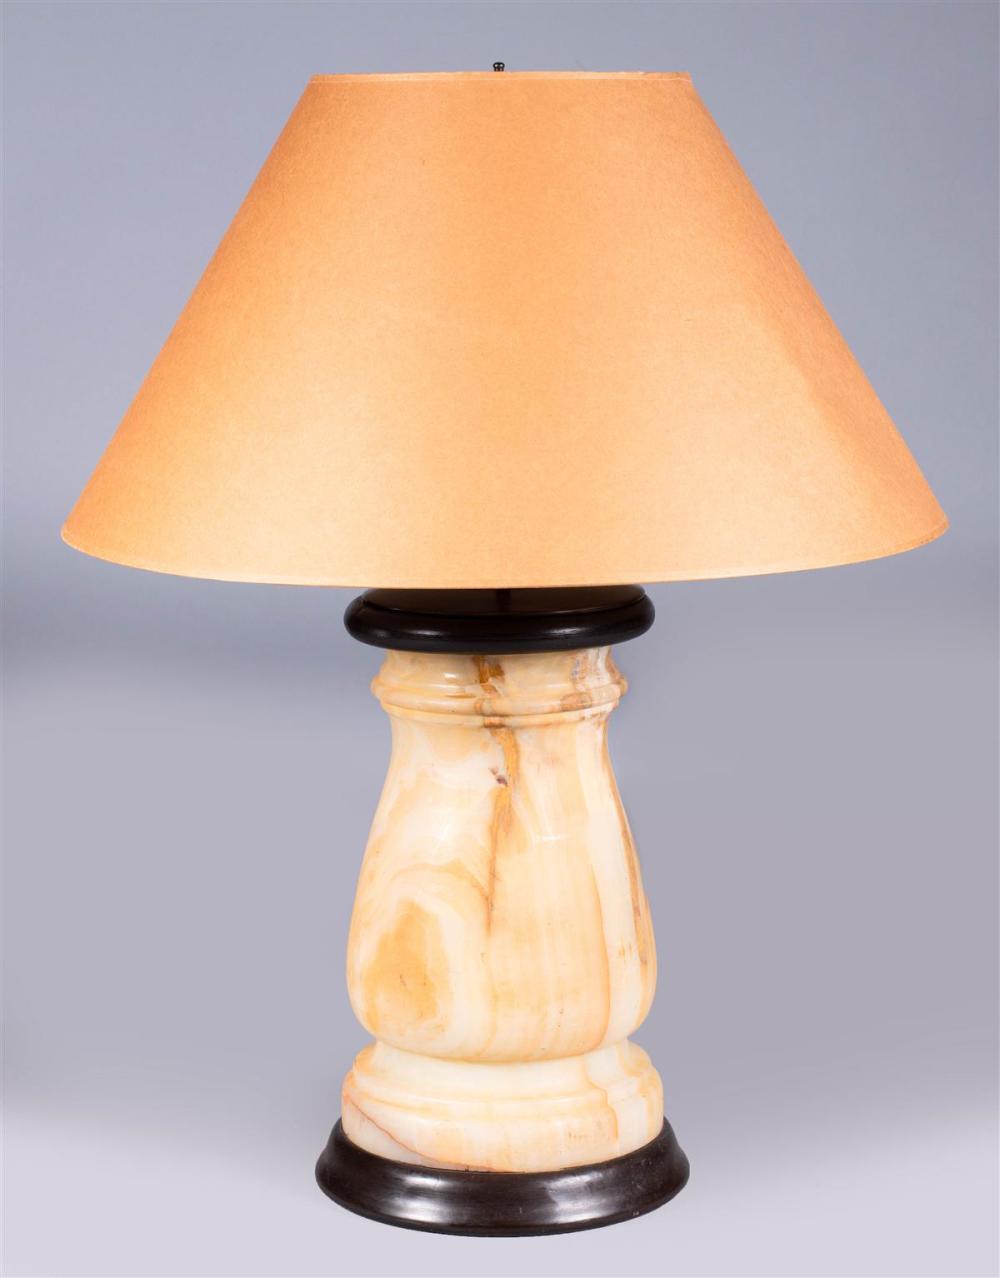 NEOCLASSICAL STYLE ONYX LAMP, LATE